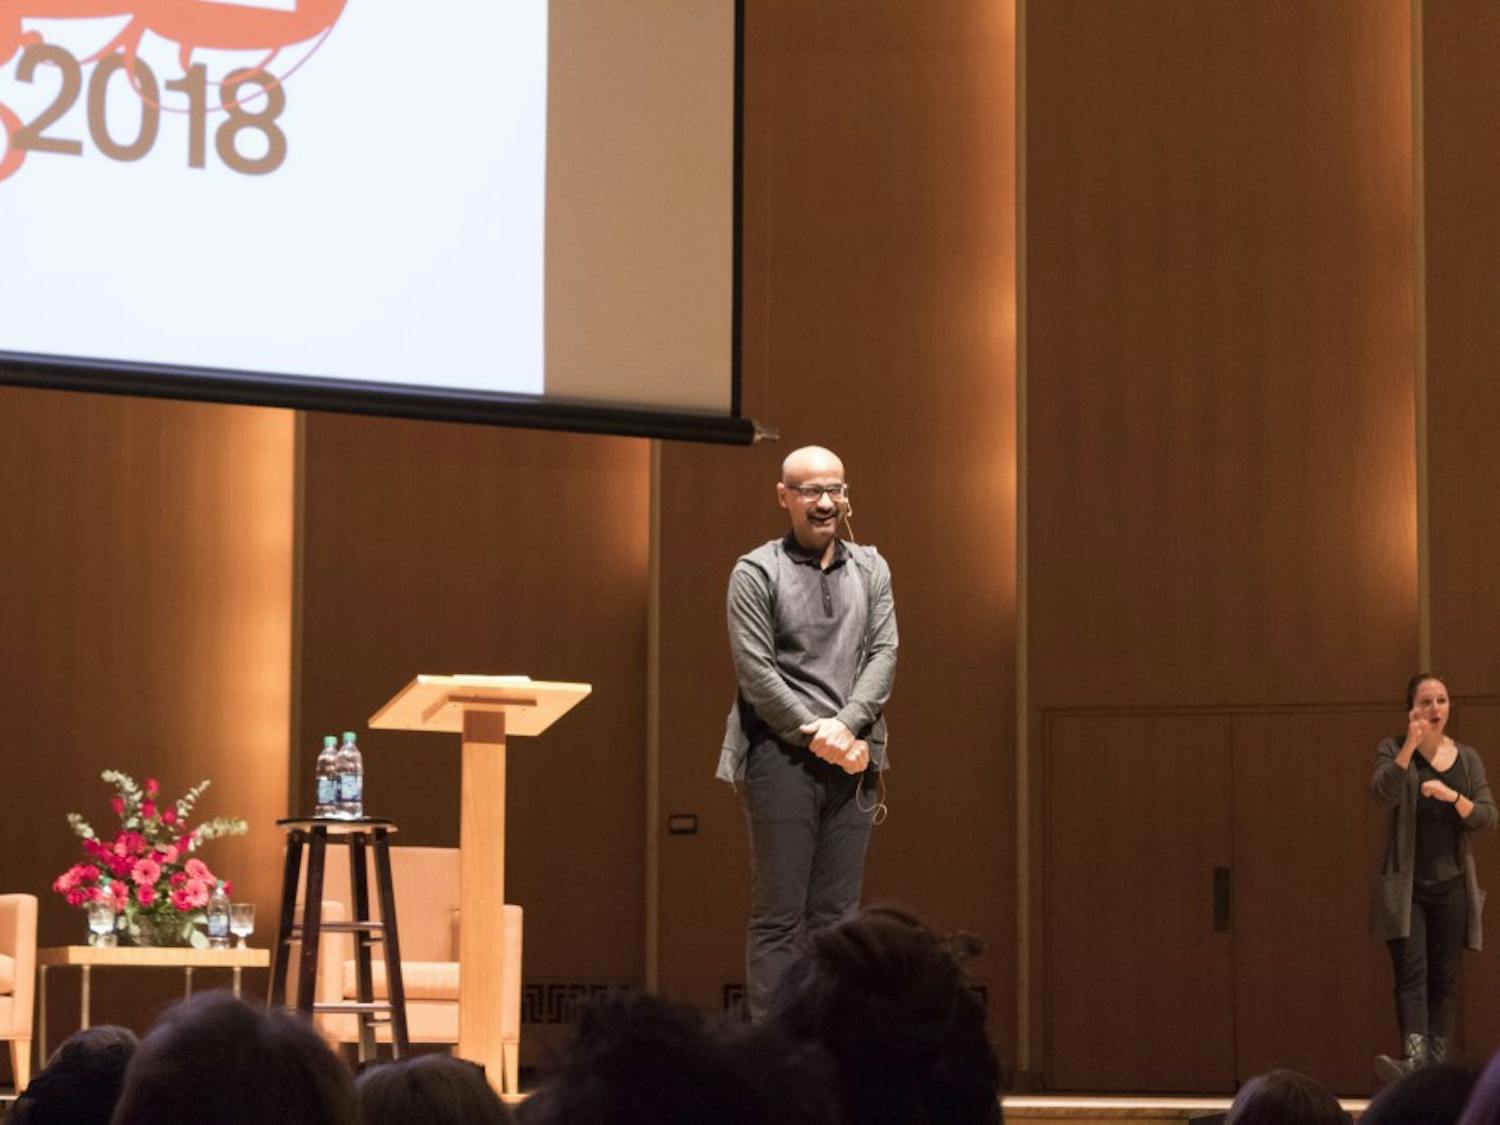 Junot Díaz spoke to a sold out crowd on Friday night about the feelings of immigrants and what it’s like to be an immigrant writer.